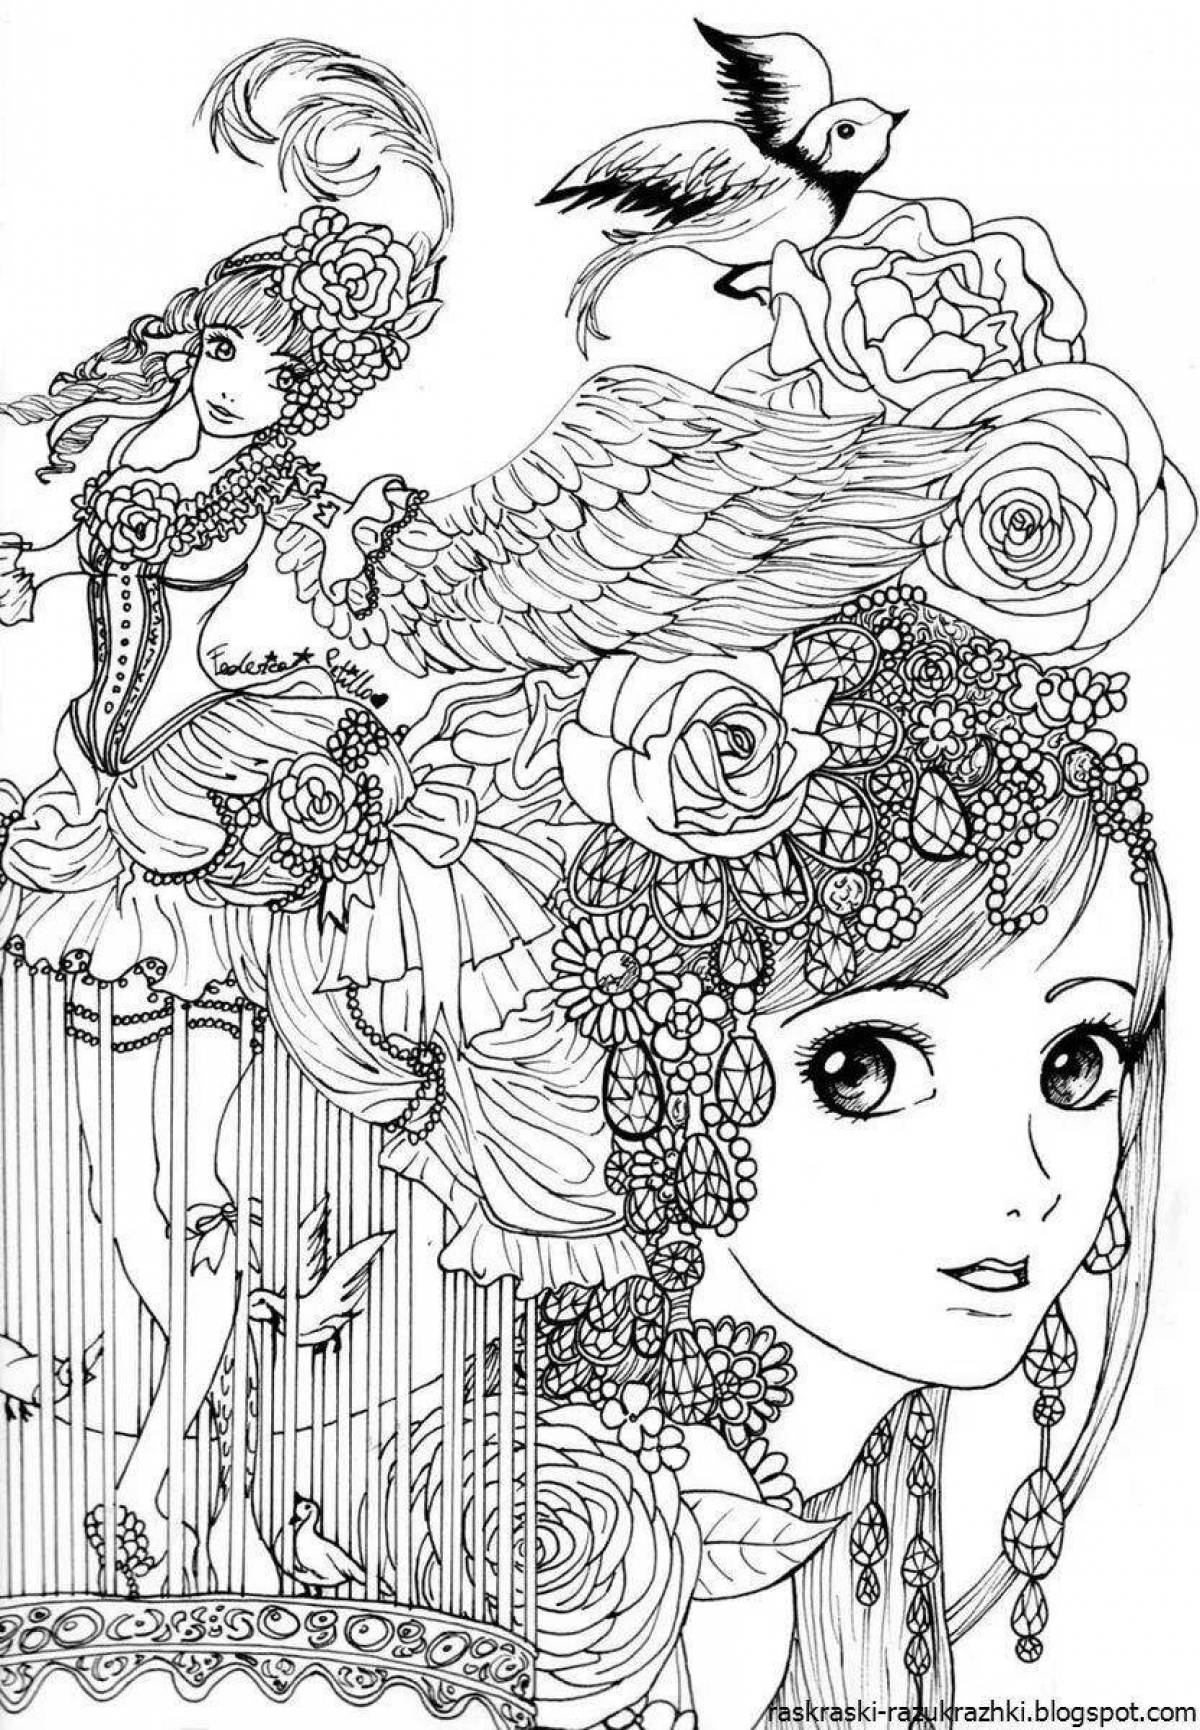 Radiant coloring page is very beautiful and complex